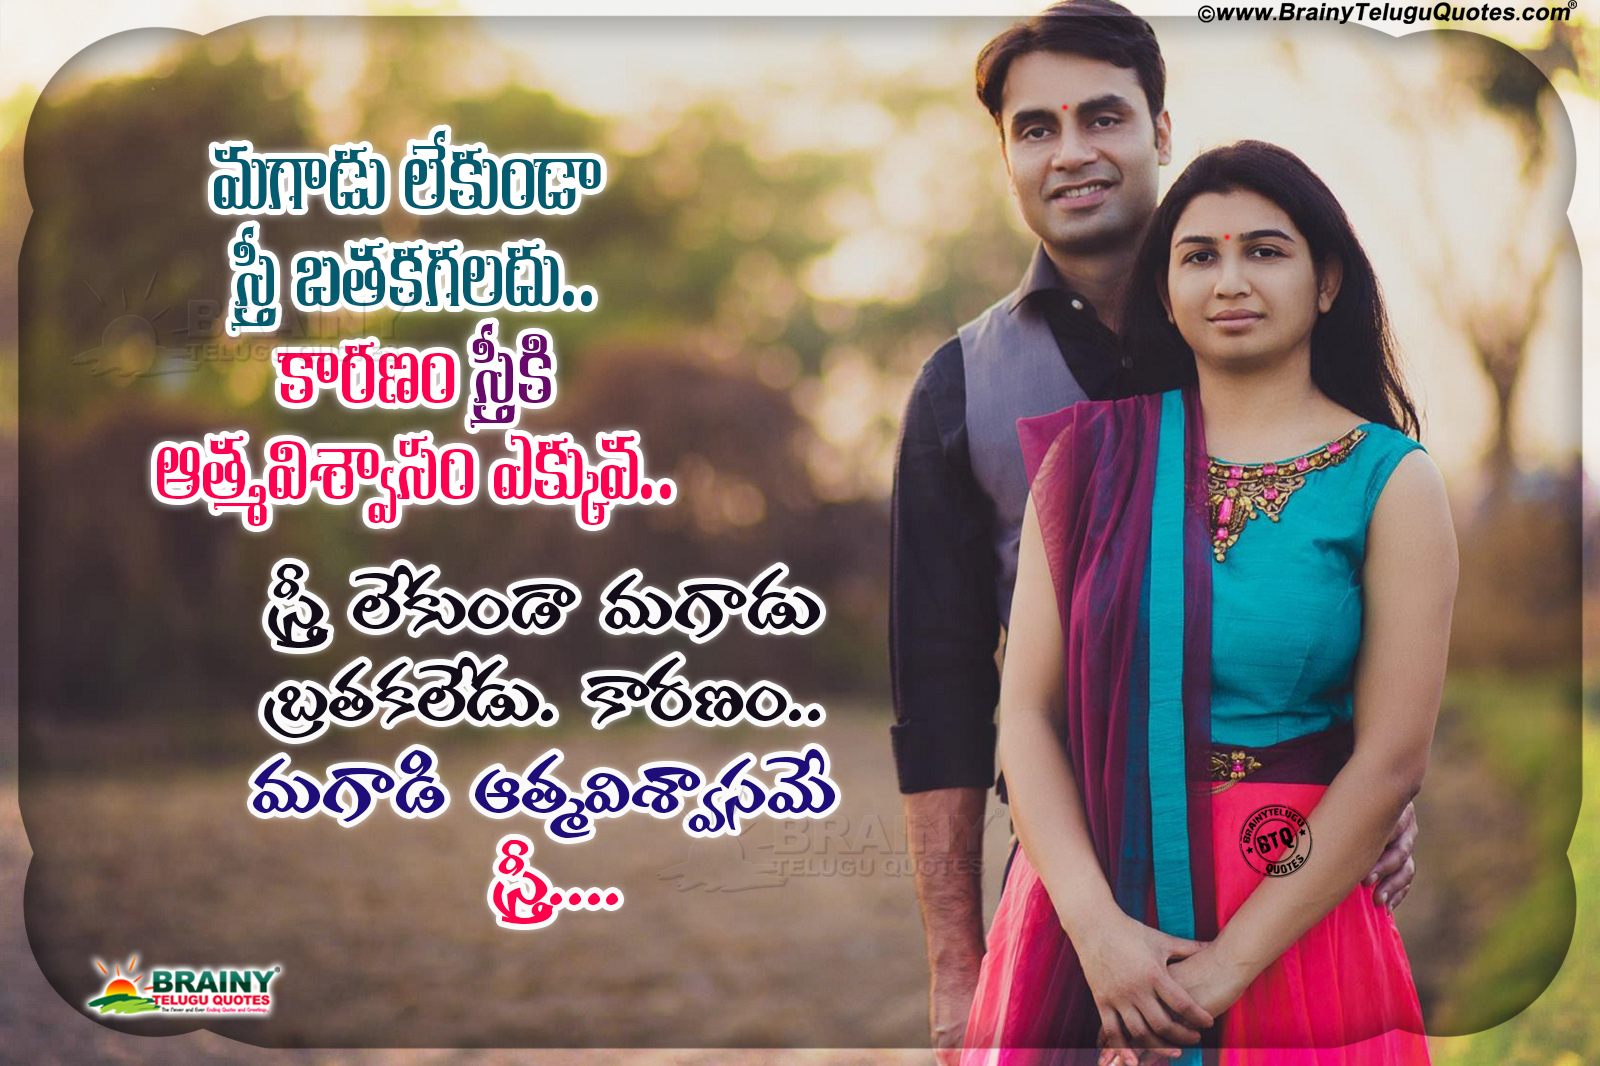 Sweet Love Quotes For Husband In Telugu - Love and trust are two of the